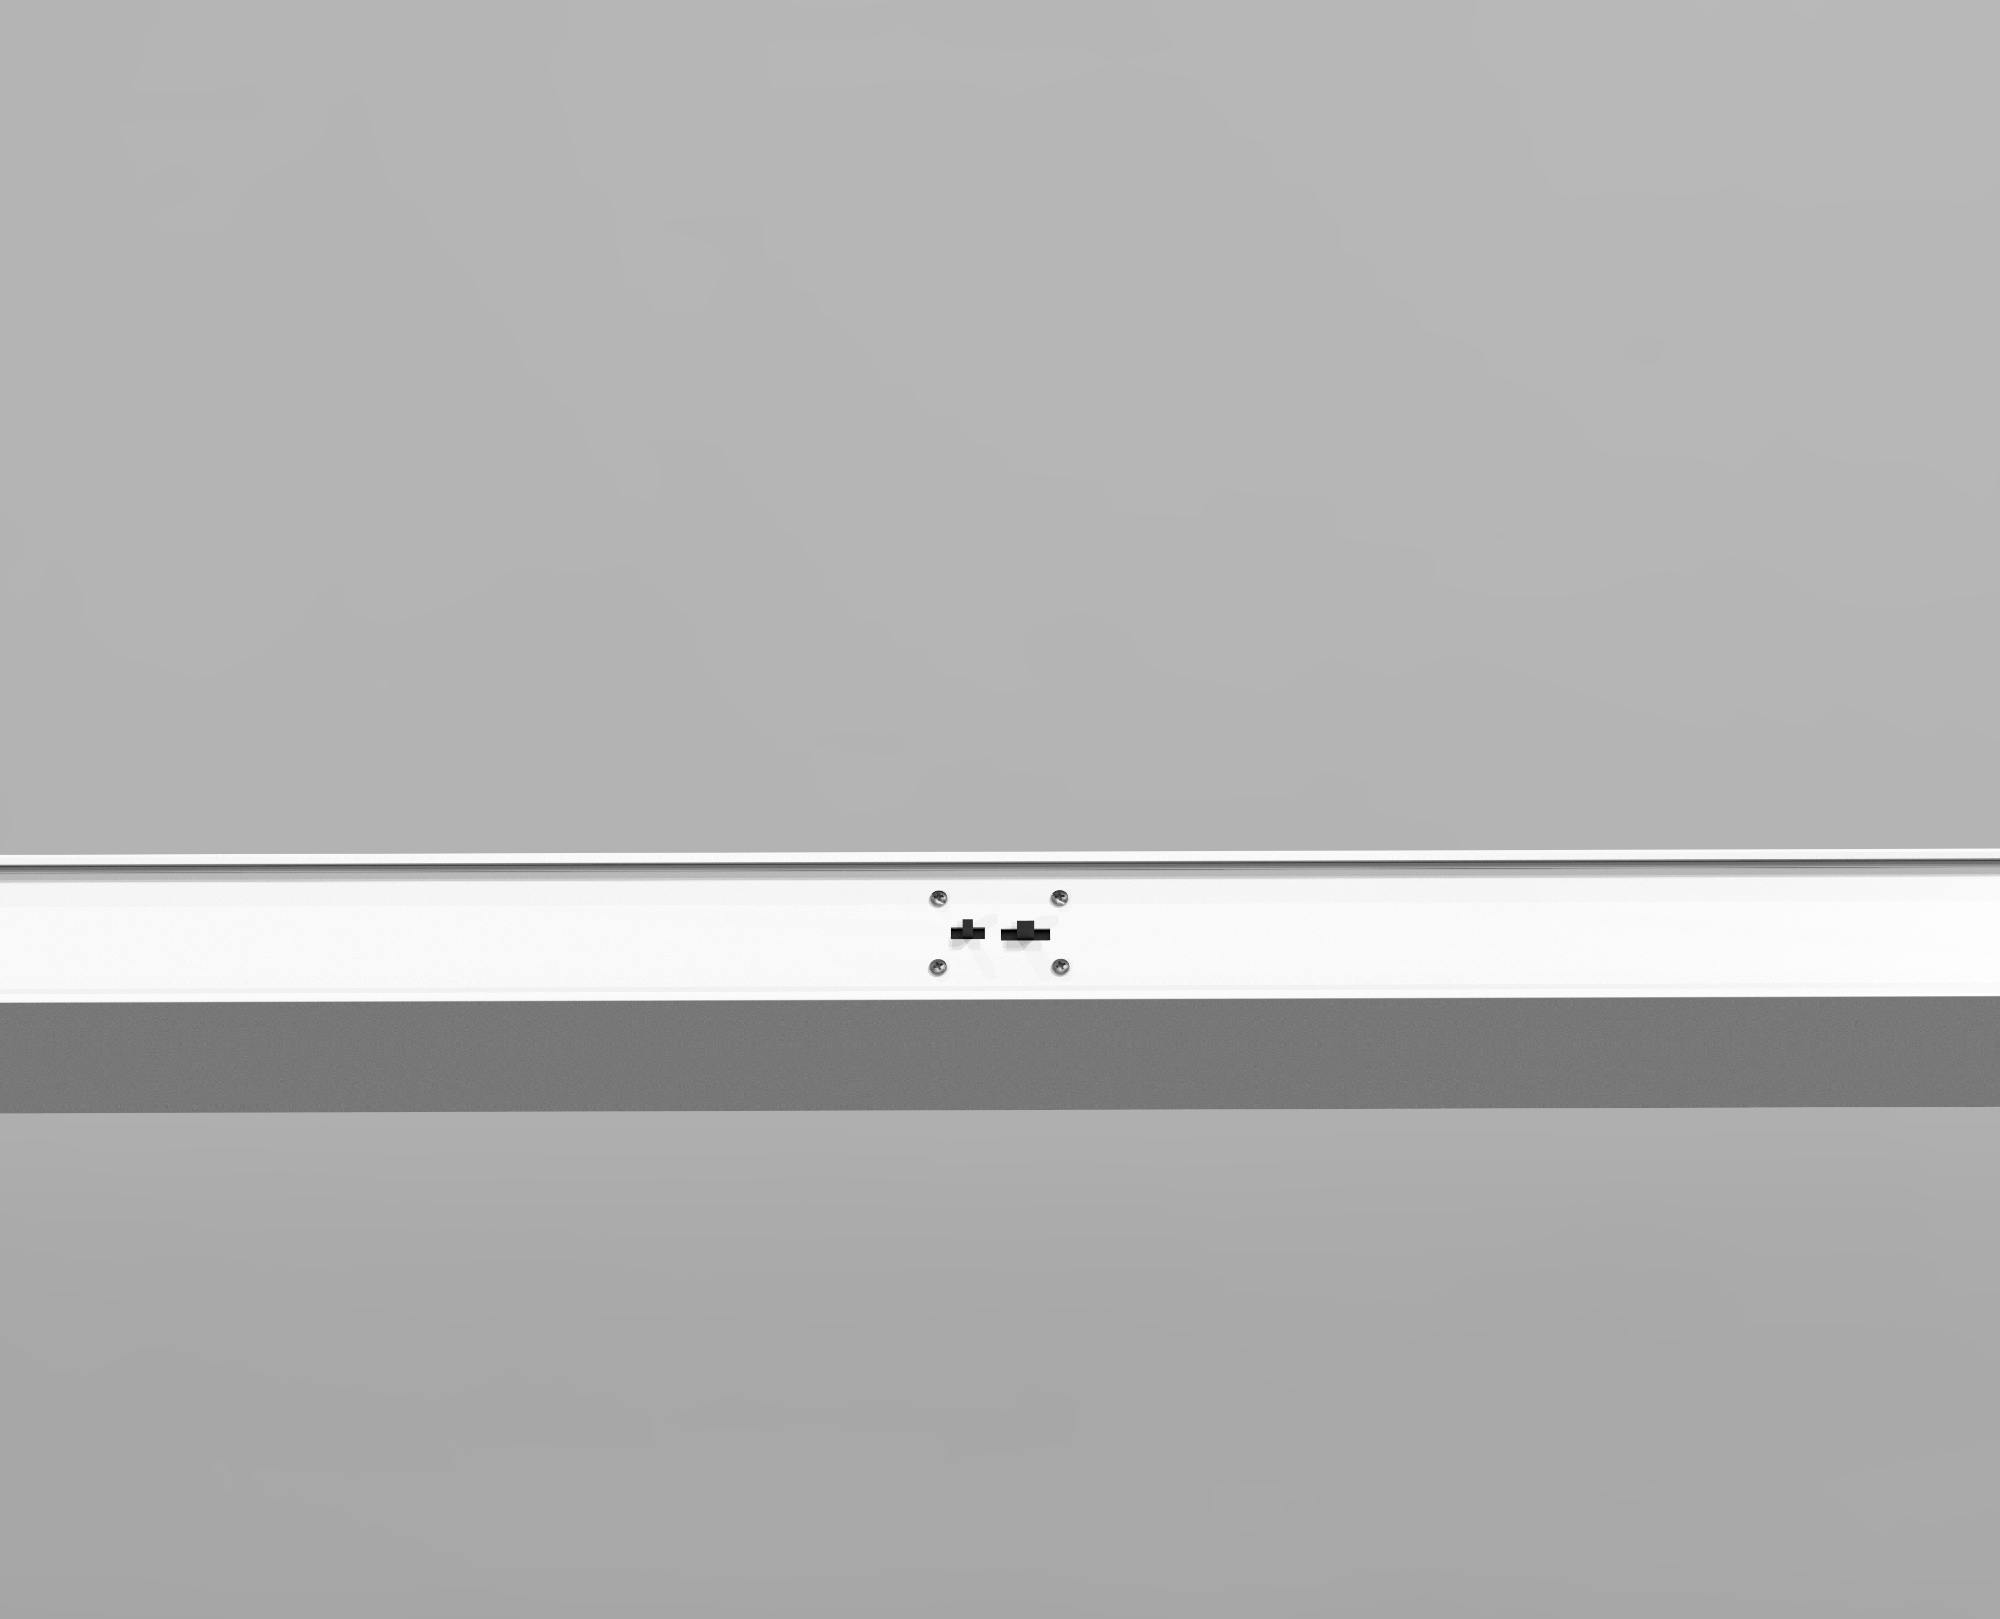 NYX led linear light CCT&POWER switch-dimmable led padent office light